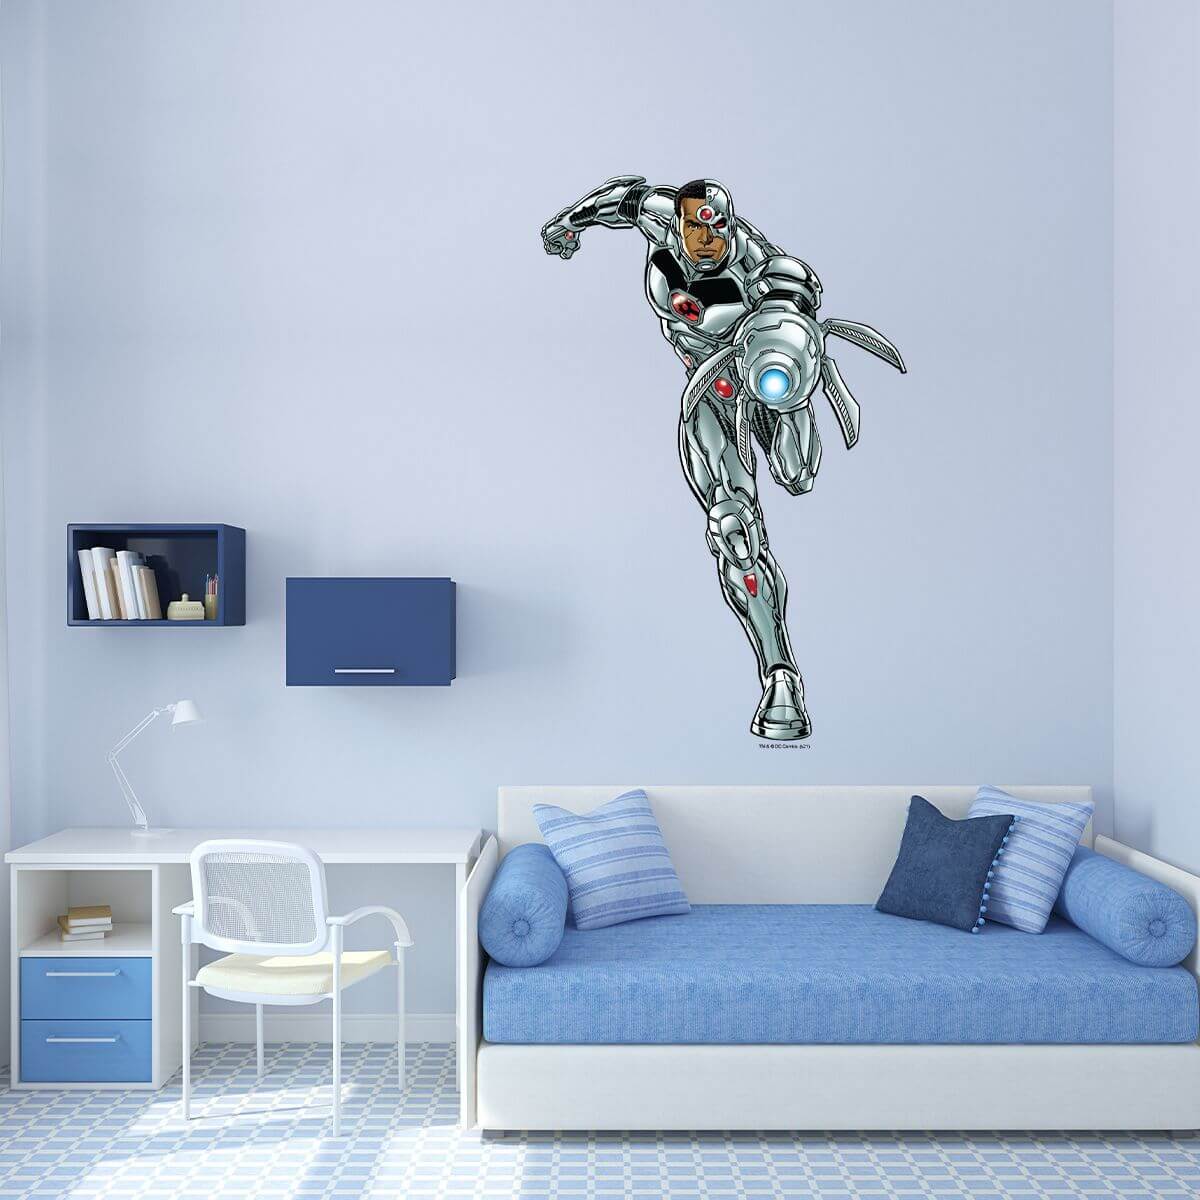 Kismet Decals Cyborg Charge Attack Licensed Wall Sticker - Easy DIY Justice League Home & Room Decor Wall Art - Kismet Decals